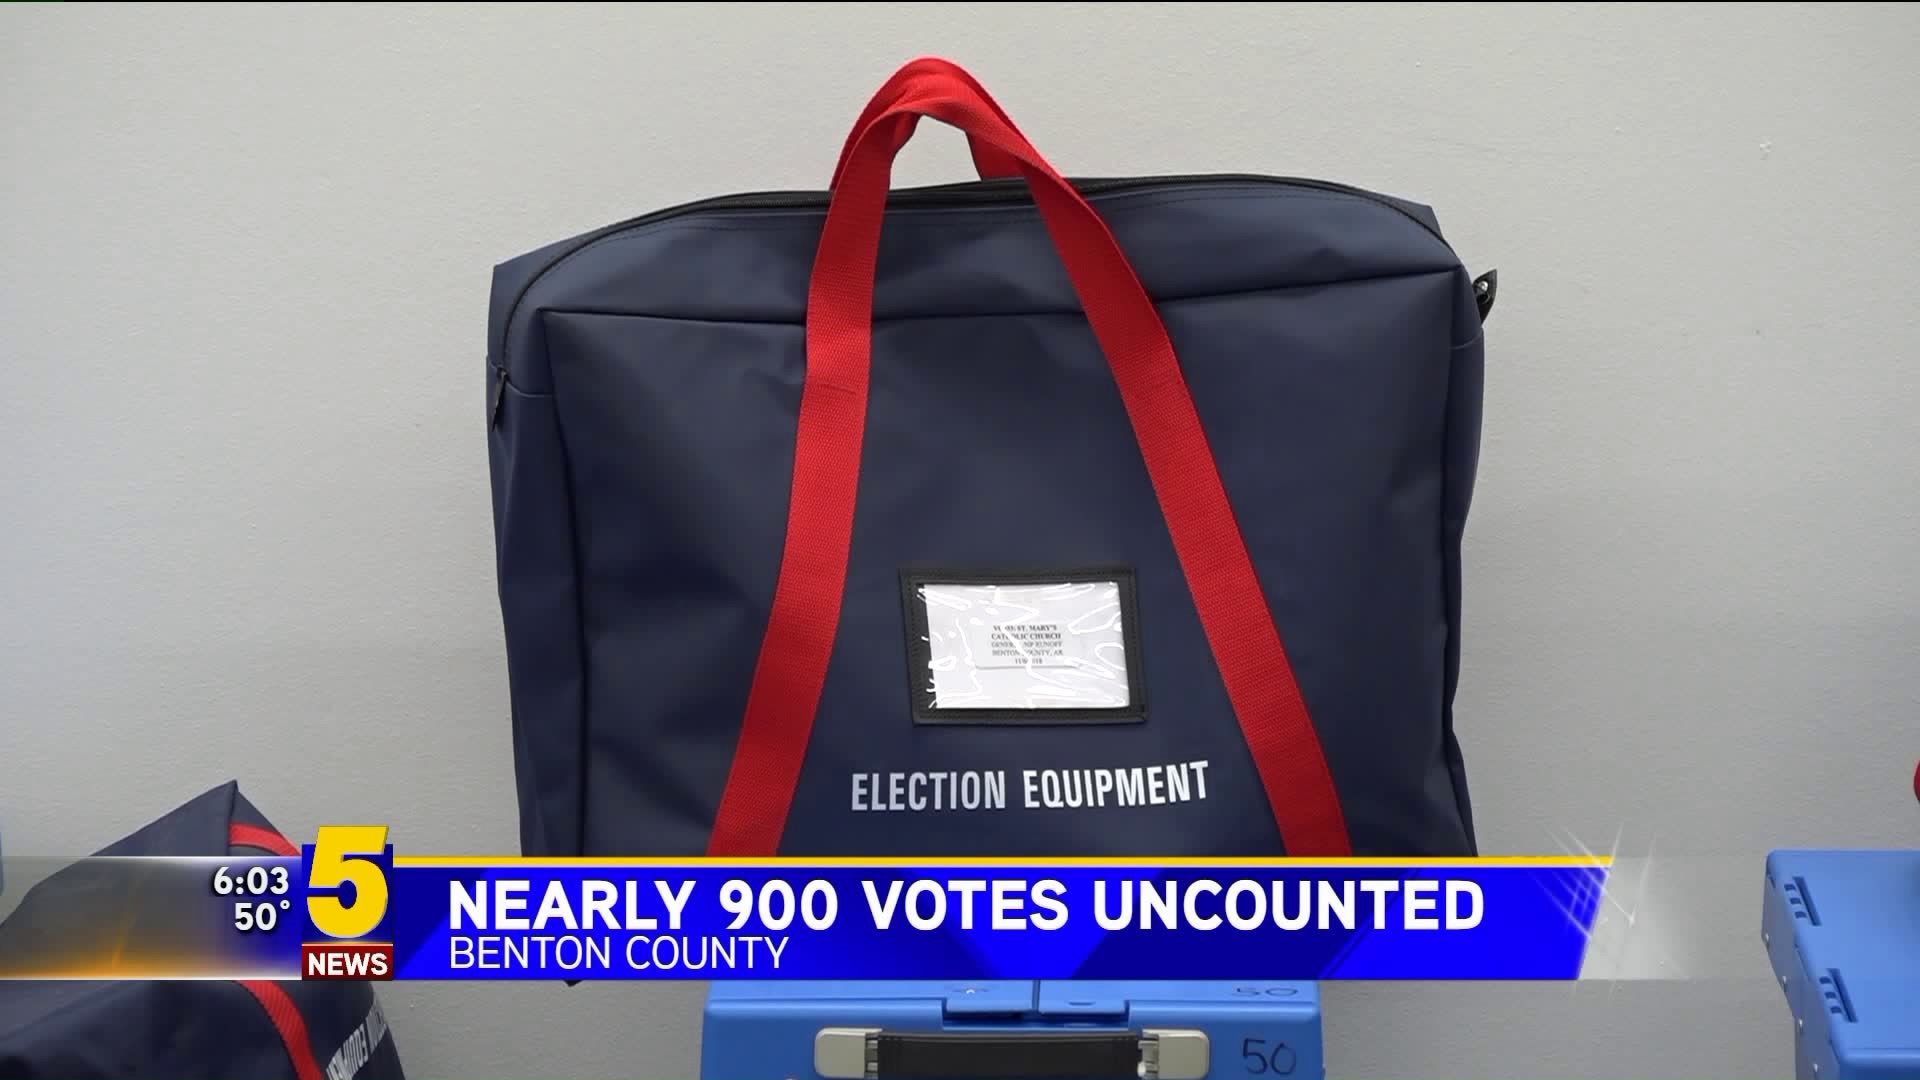 Nearly 900 Votes Uncounted In Benton County